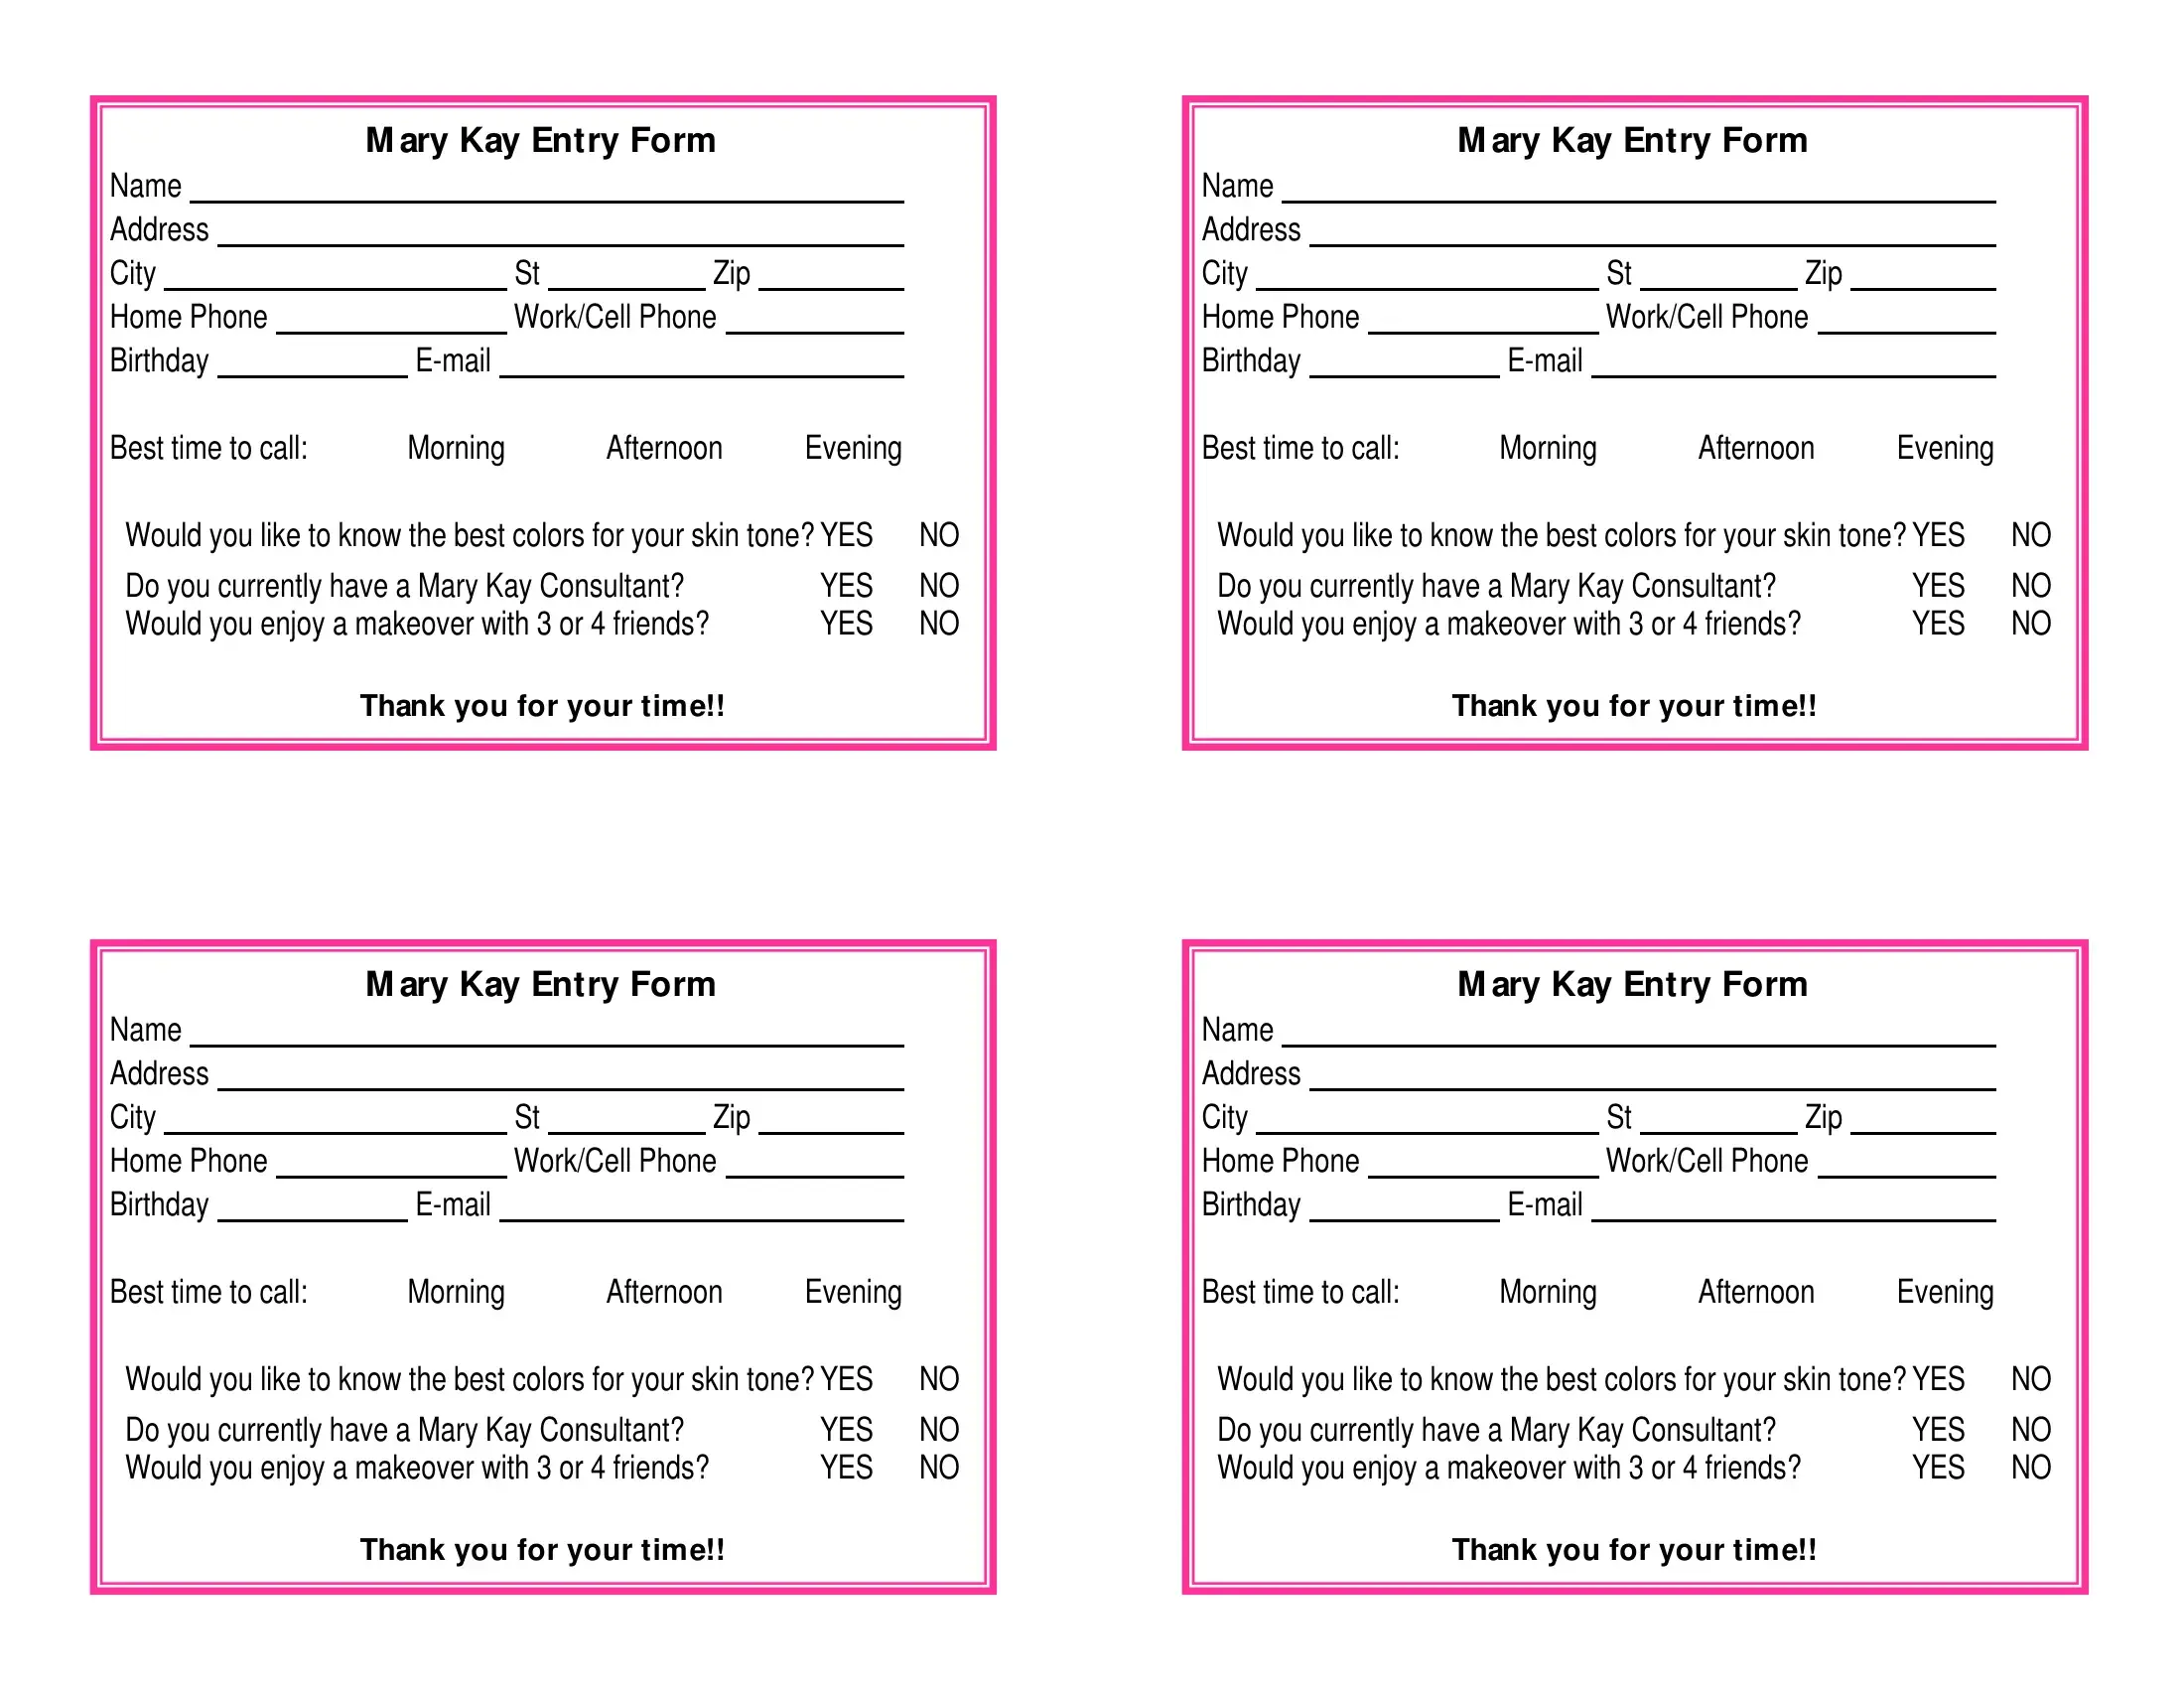 Mary Kay Entry Form Preview